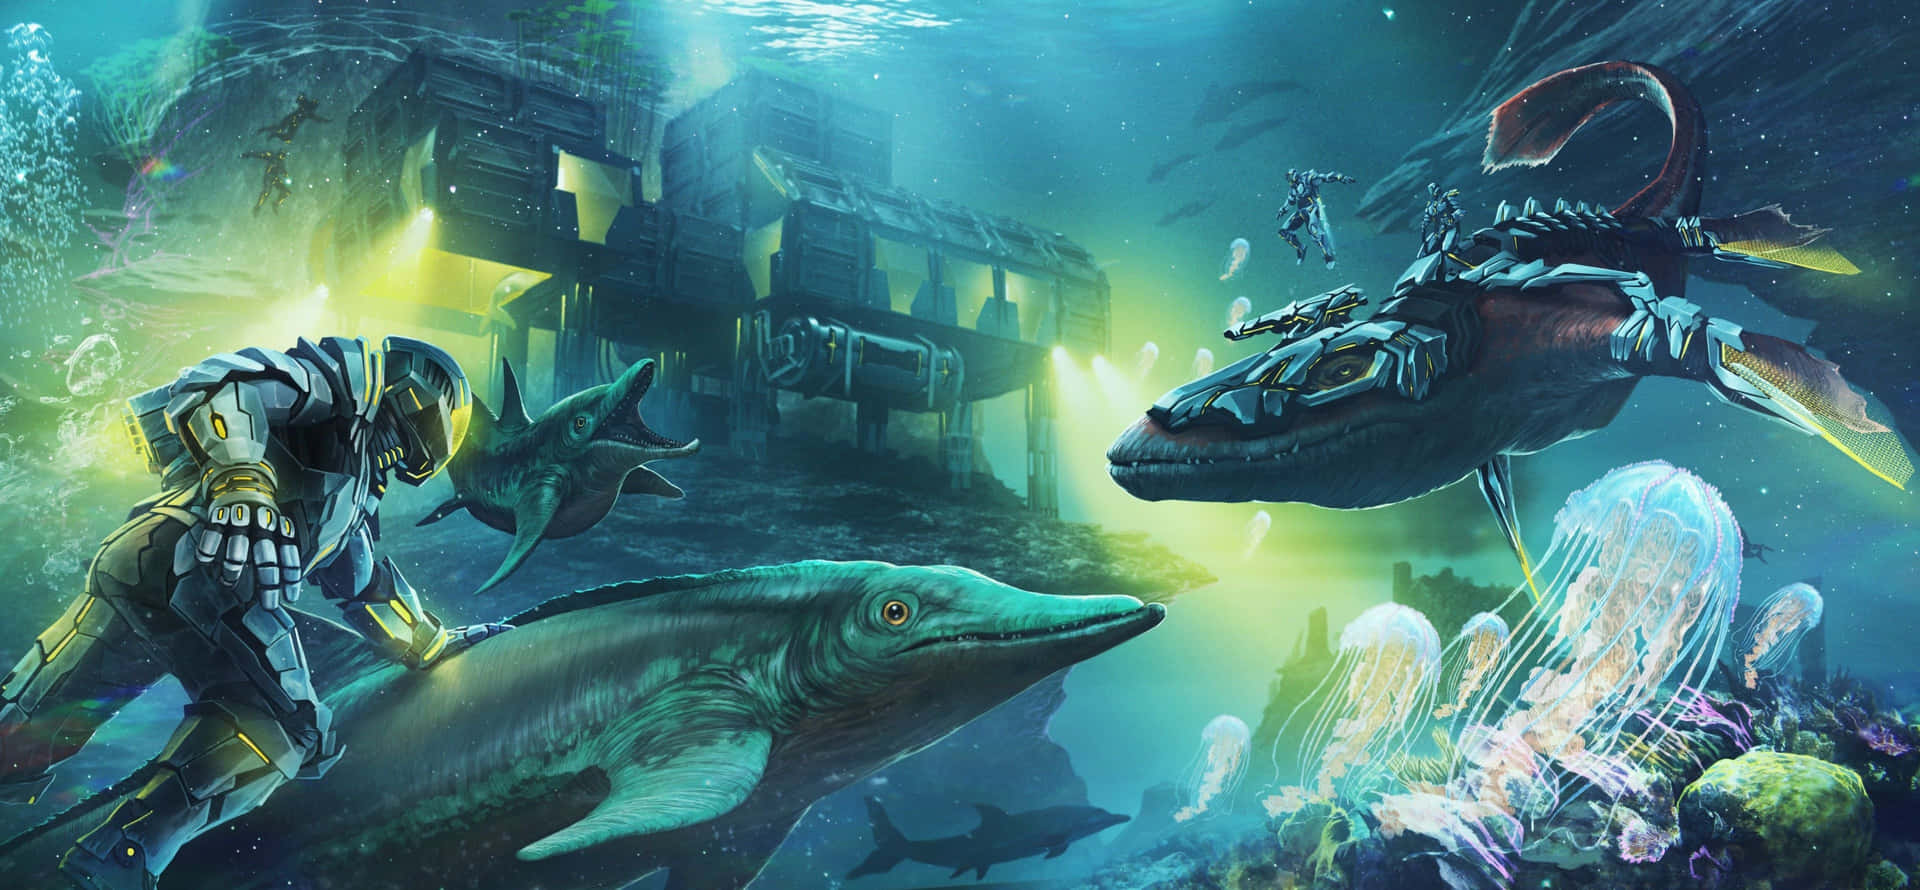 Explore the world of Ark in this stunning game Wallpaper